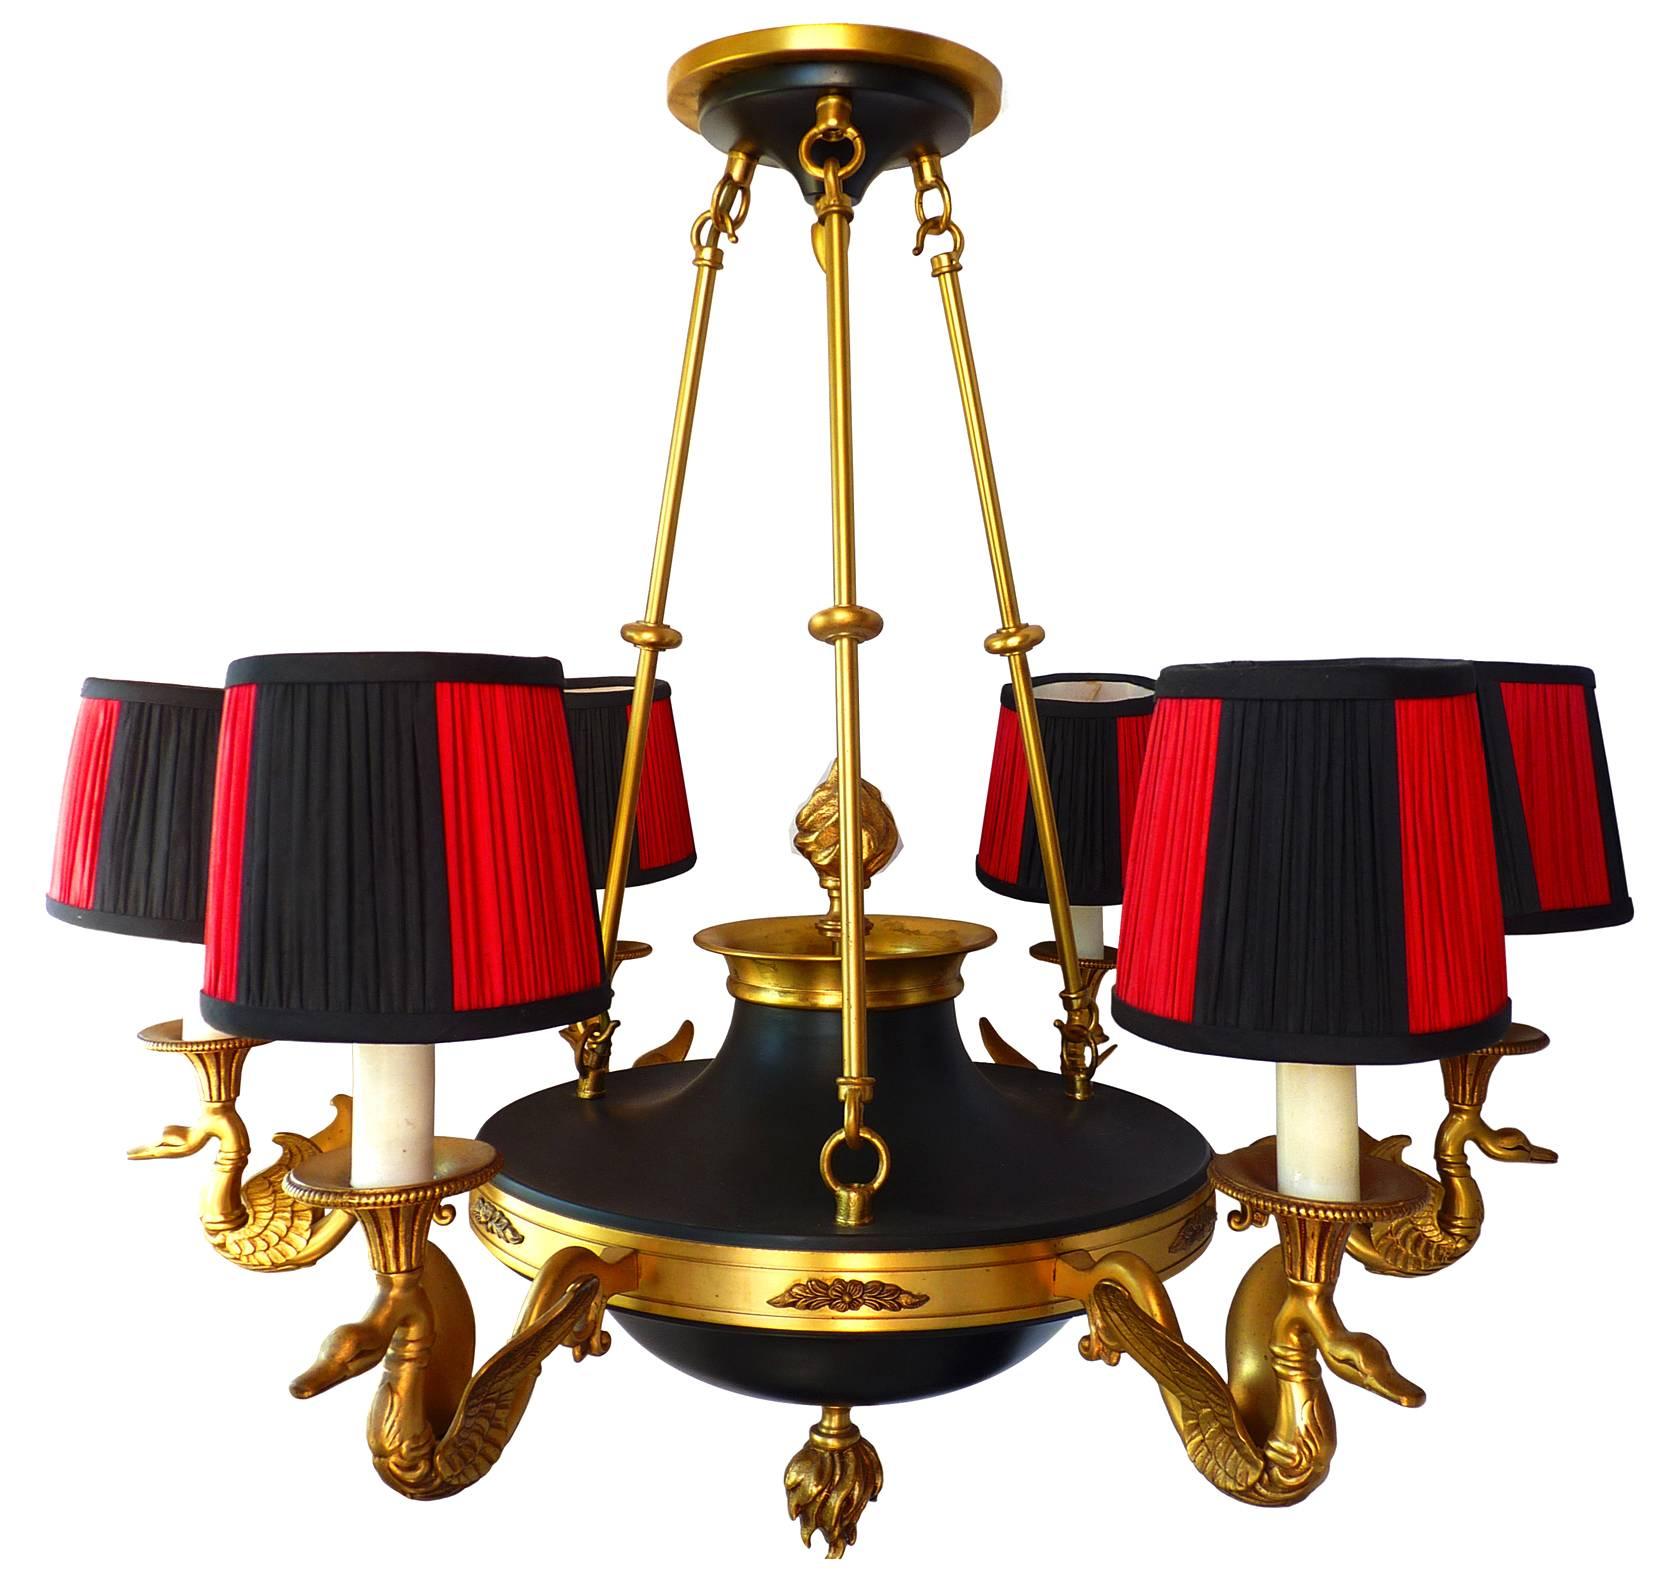 Splendid gilt bronze French Empire style chandelier with six swan’s light arms and unusual lampshades
Measures:
Diameter 77 cm
Height 77 cm + 83 chain = 160 cm
Weight 10 Kg/ 22 lb.
Six light bulb E 14/ good working condition.
Assembly required.